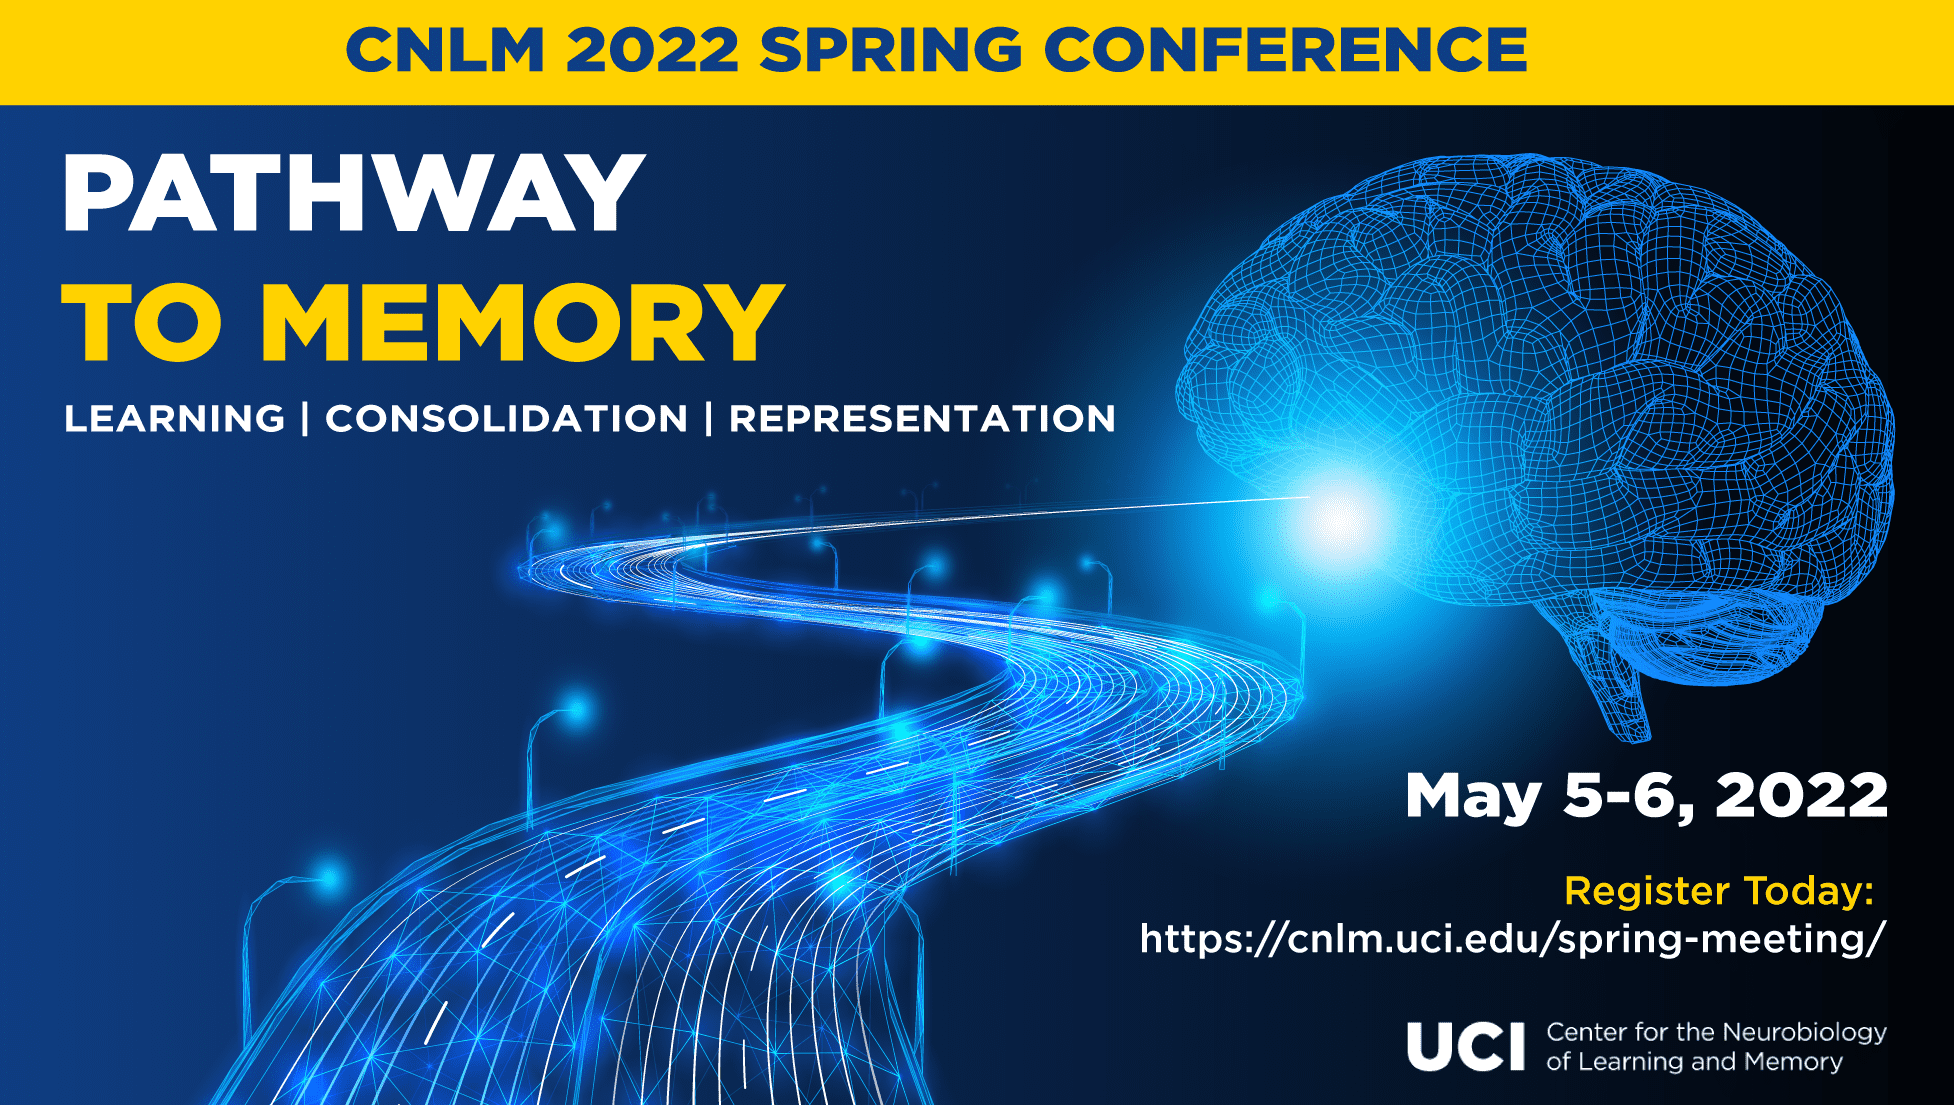 2022 CNLM Spring Conference: Pathway to Memory - image of highway meeting human brain